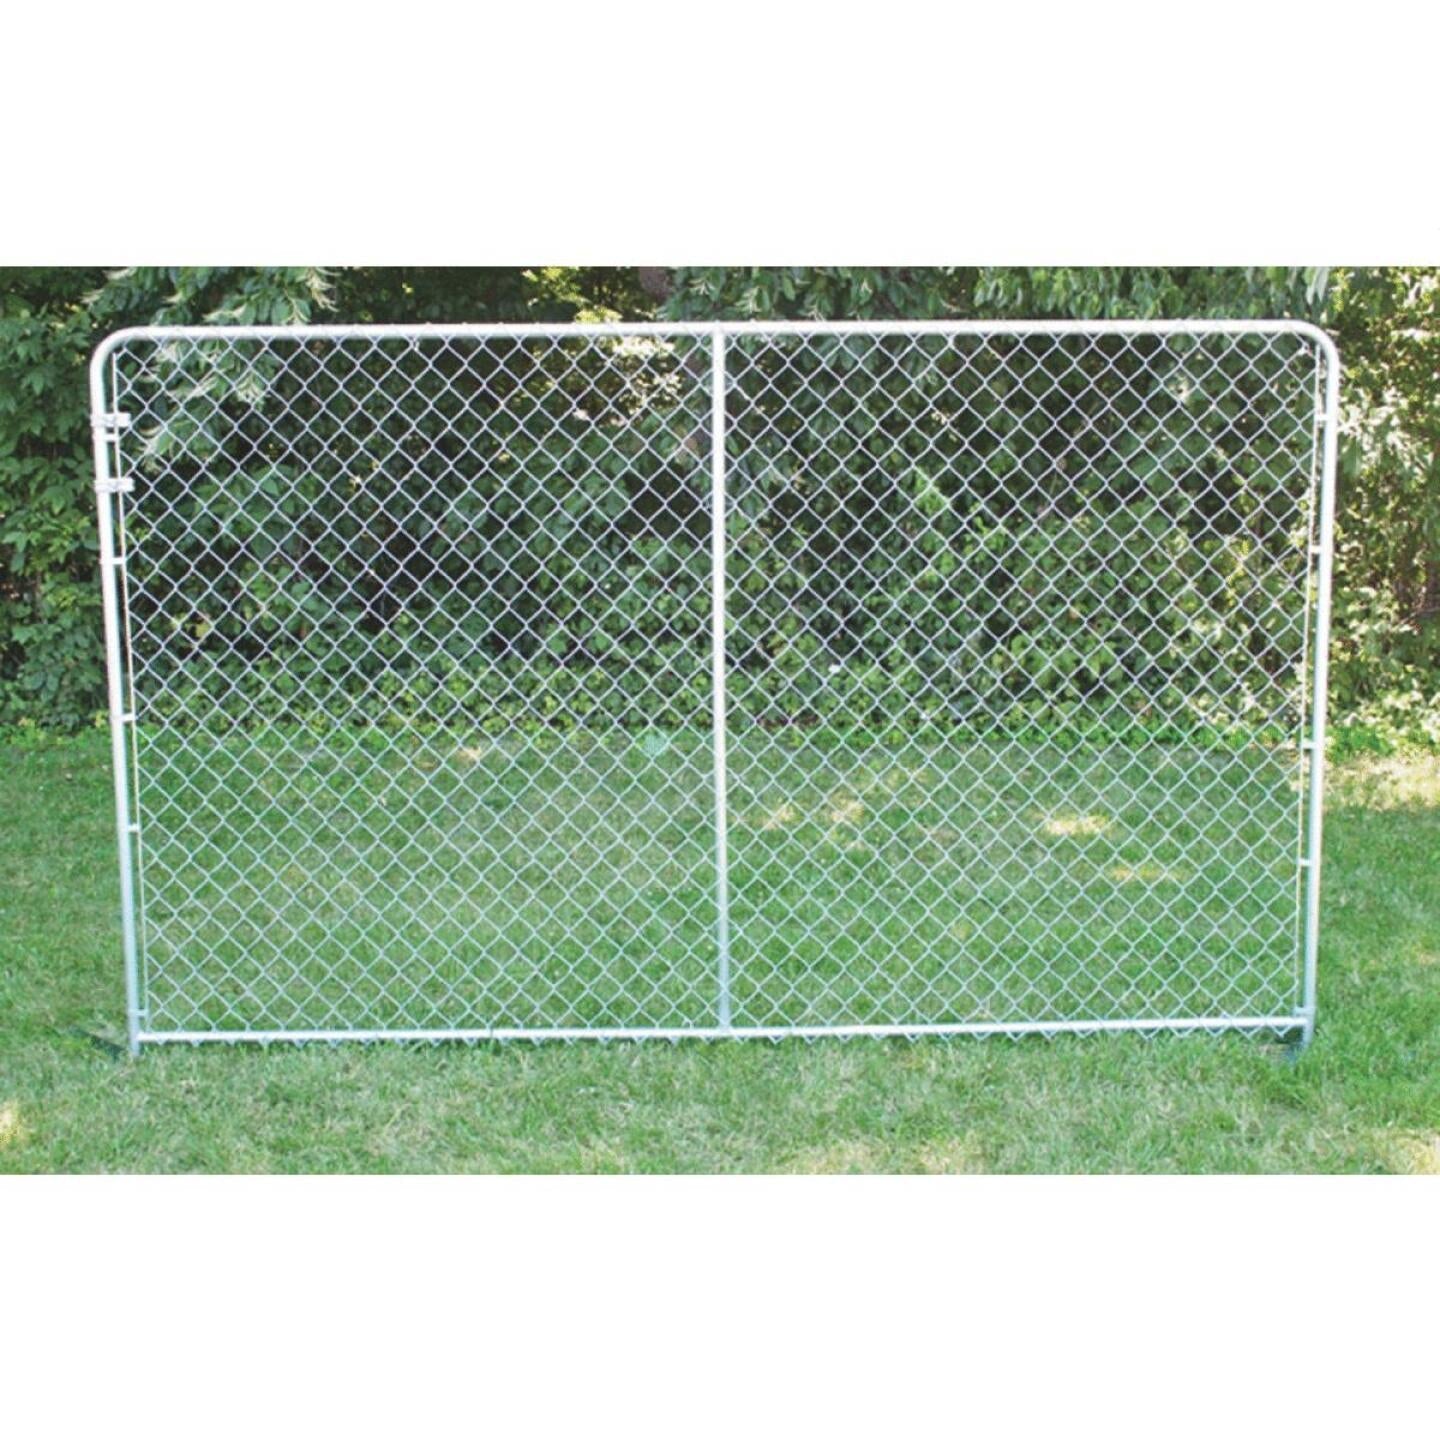 Fence Master, Fence Master Silver Series 10 Ft. W. x 6 Ft. H. Steel Kennel Panel